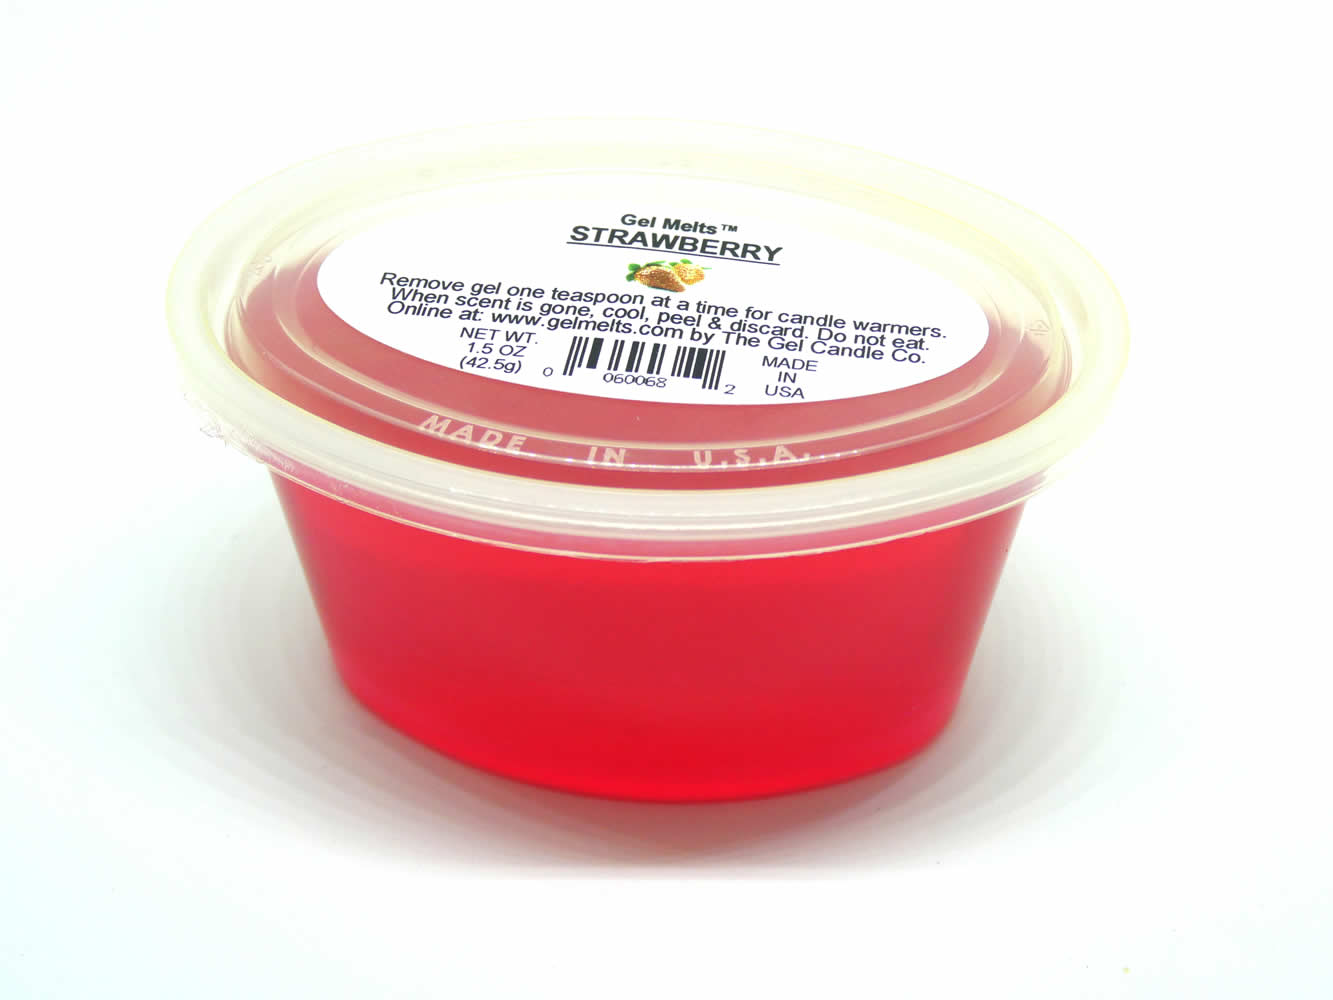 Strawberry scented Gel Melts™ Gel Wax for warmers - 3 pack